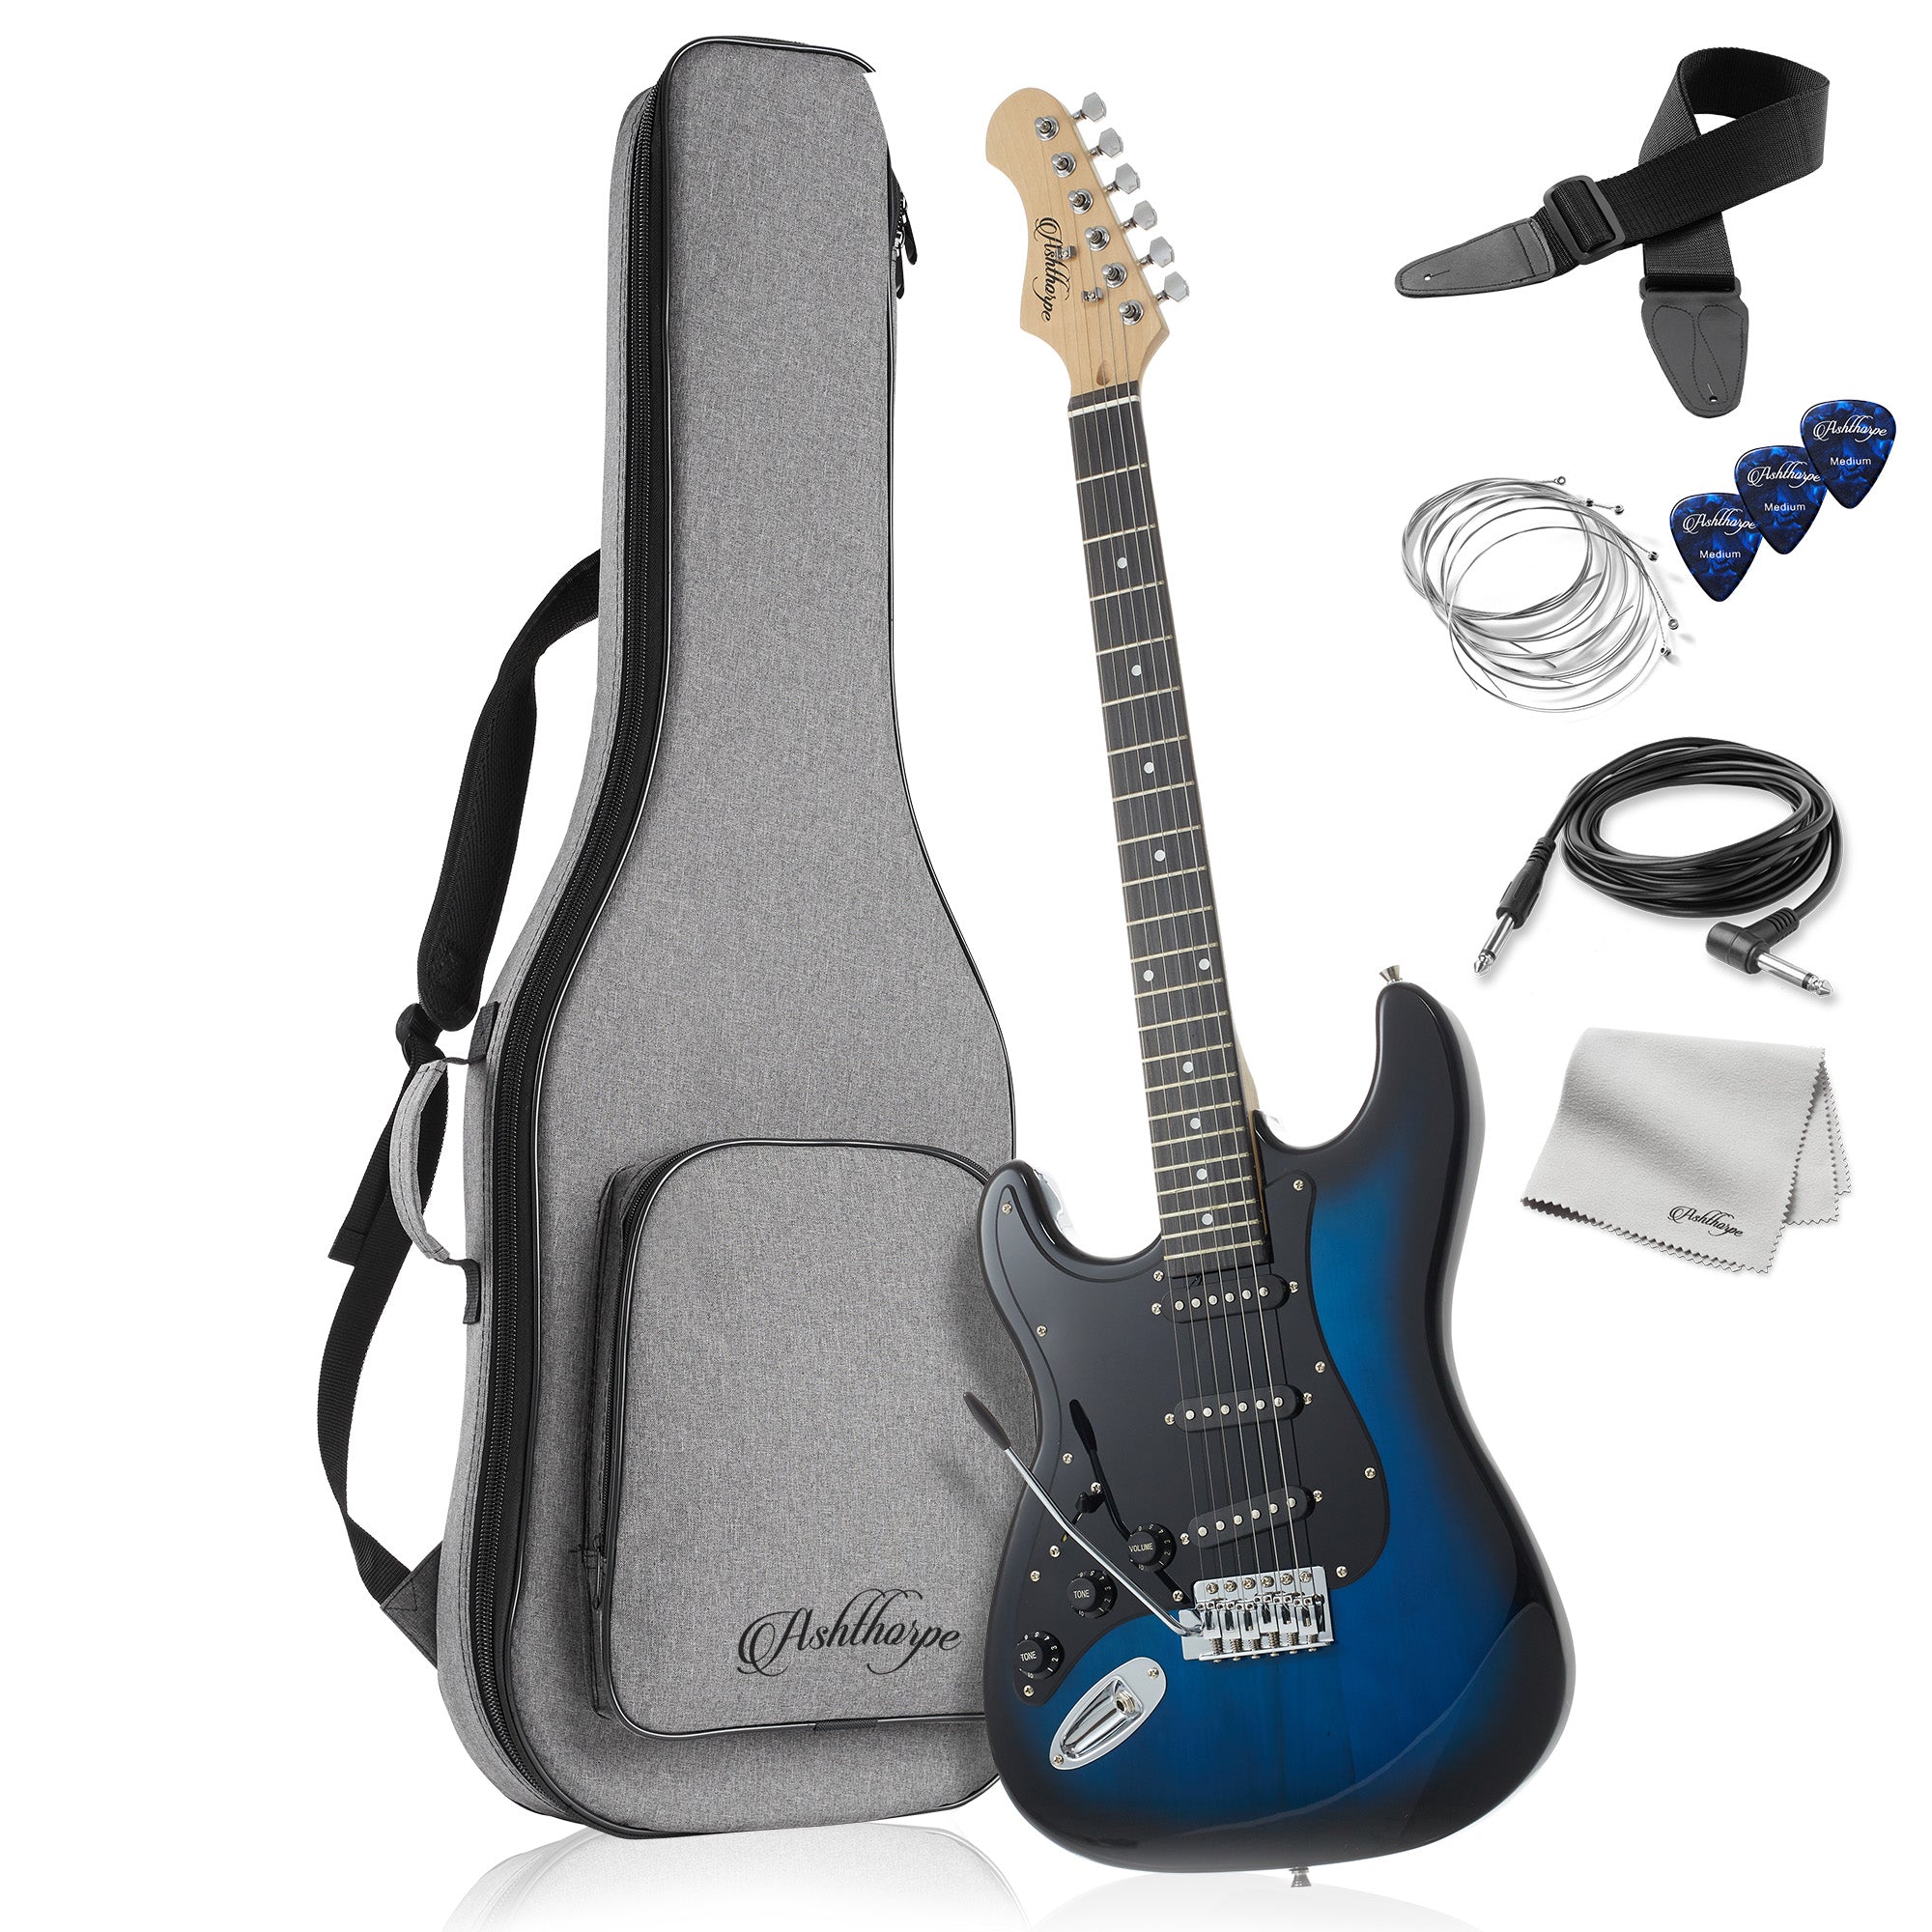 39-Inch Left Handed Full-Size Electric Guitar Beginner Kit with